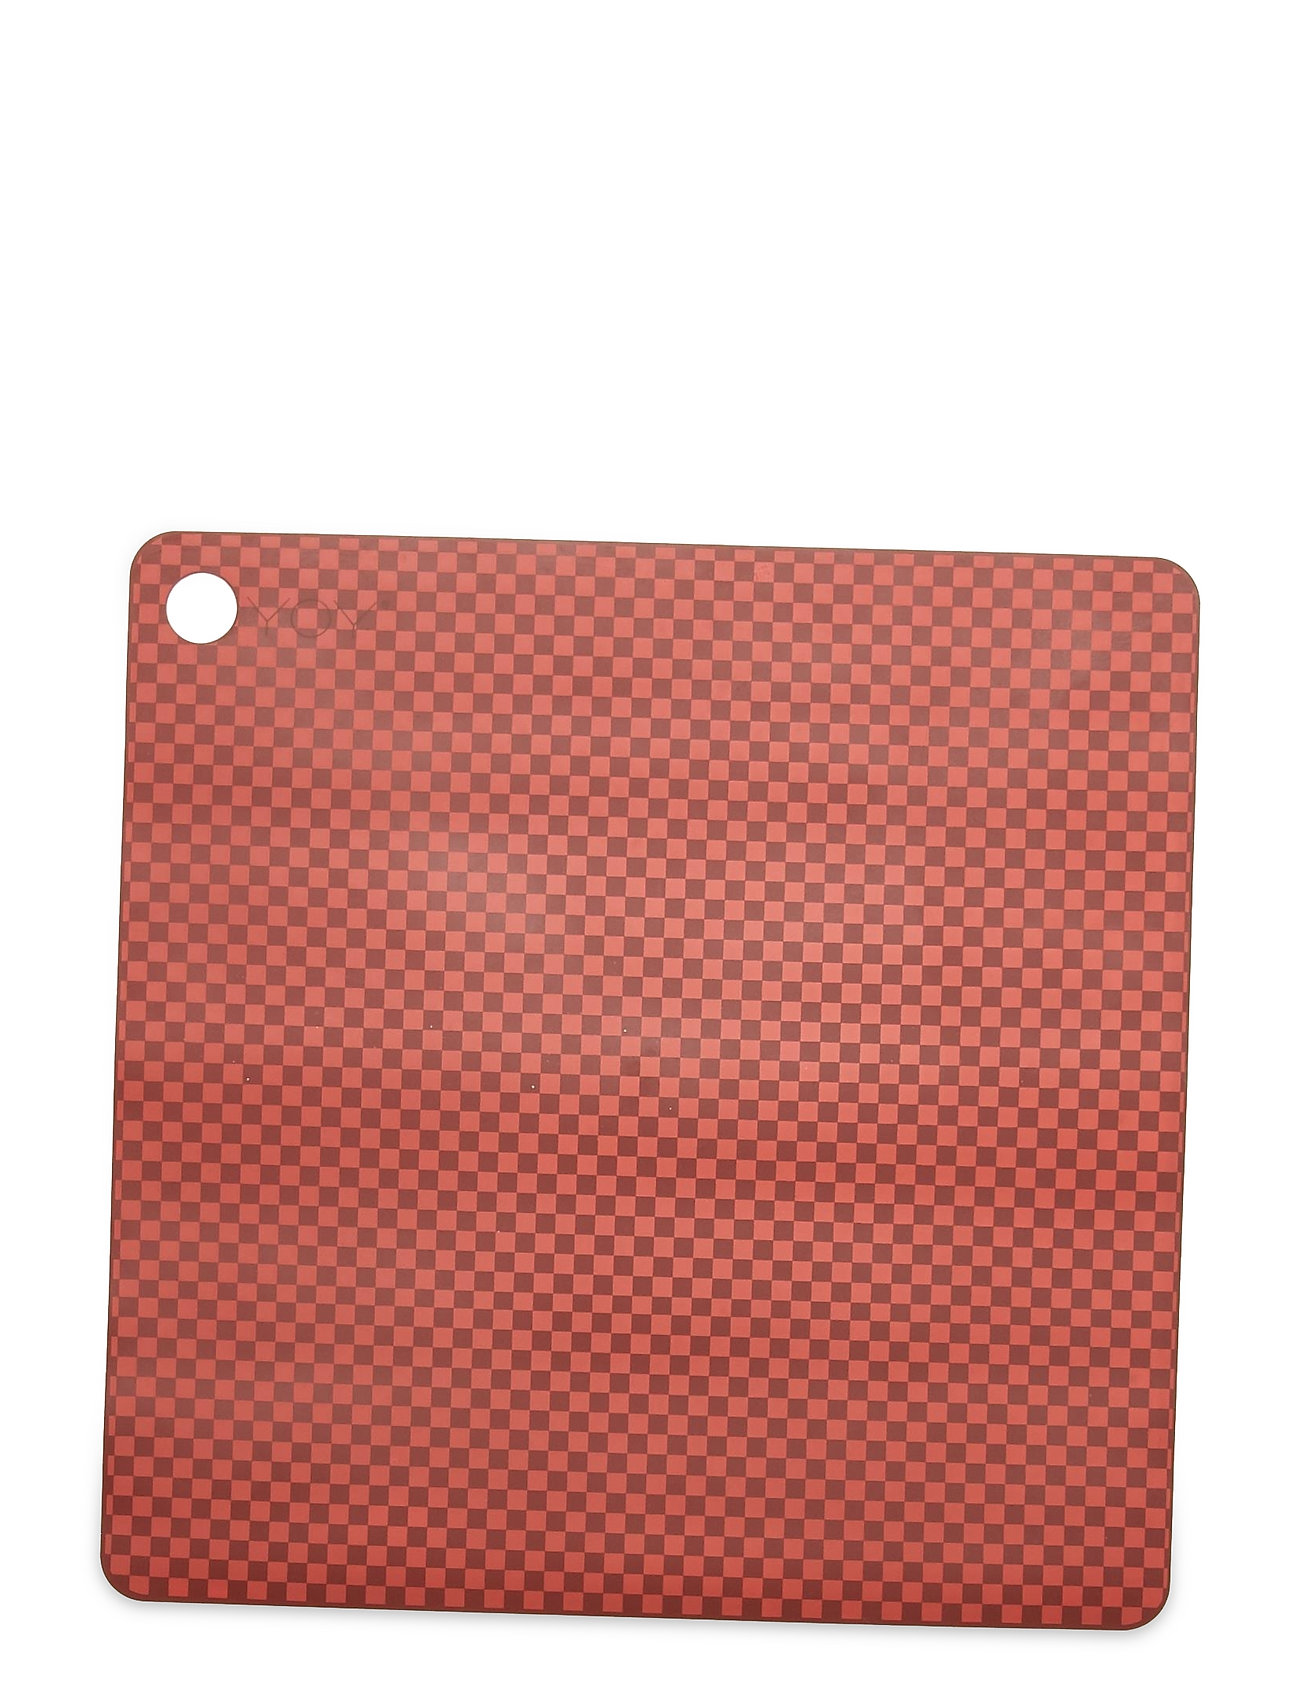 Placemat Checker - Pack Of 2 Home Textiles Kitchen Textiles Placemats Red OYOY Living Design